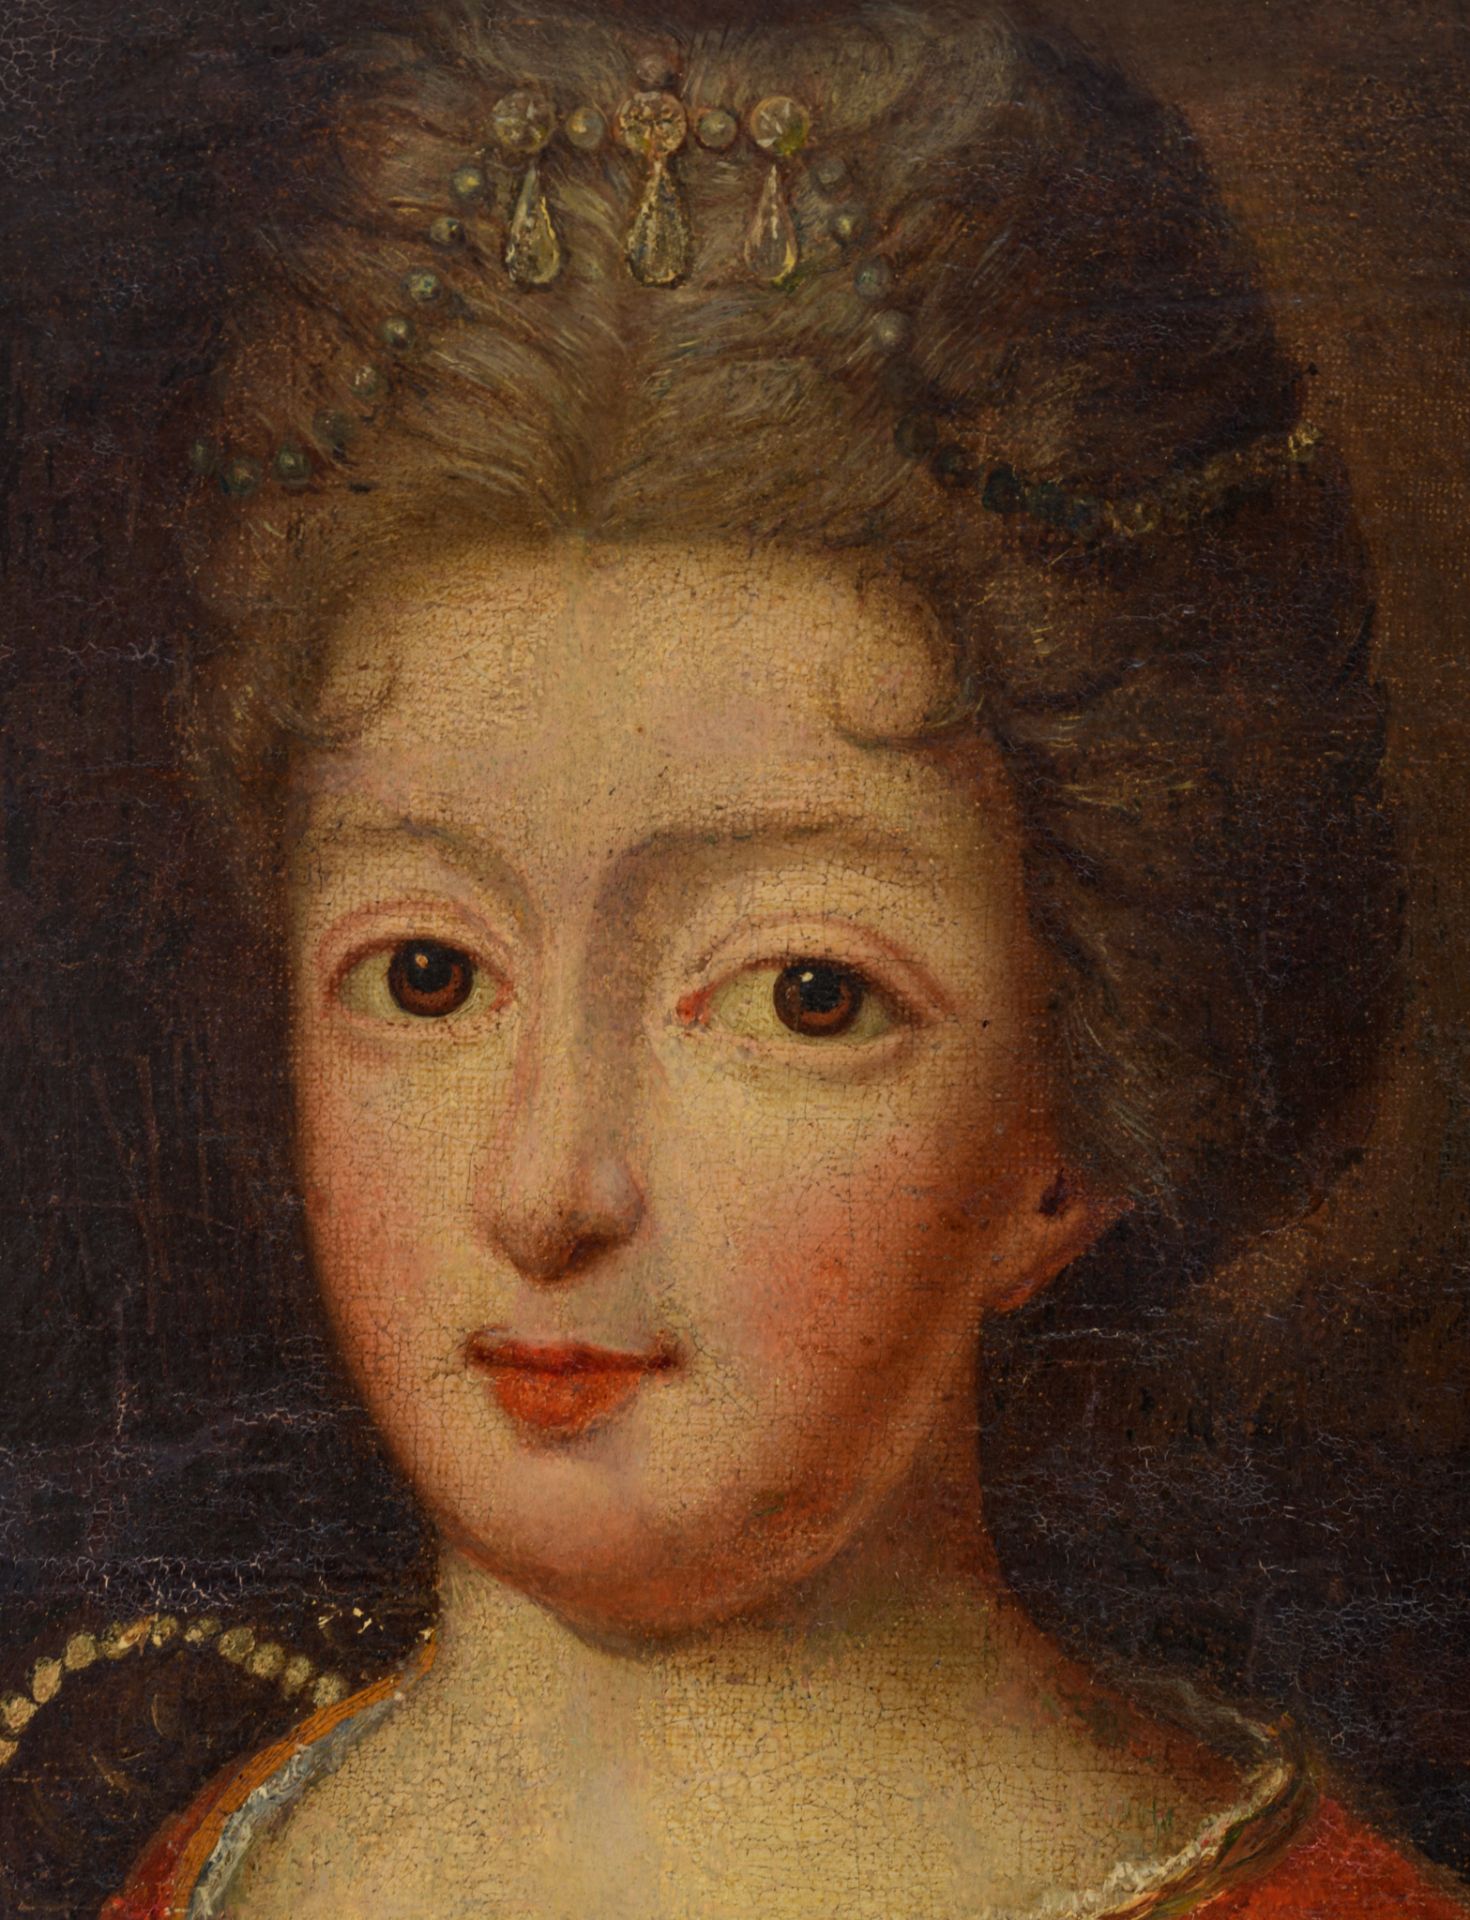 The portrait of a noble lady, 18thC, 32 x 39 cm - Image 10 of 13